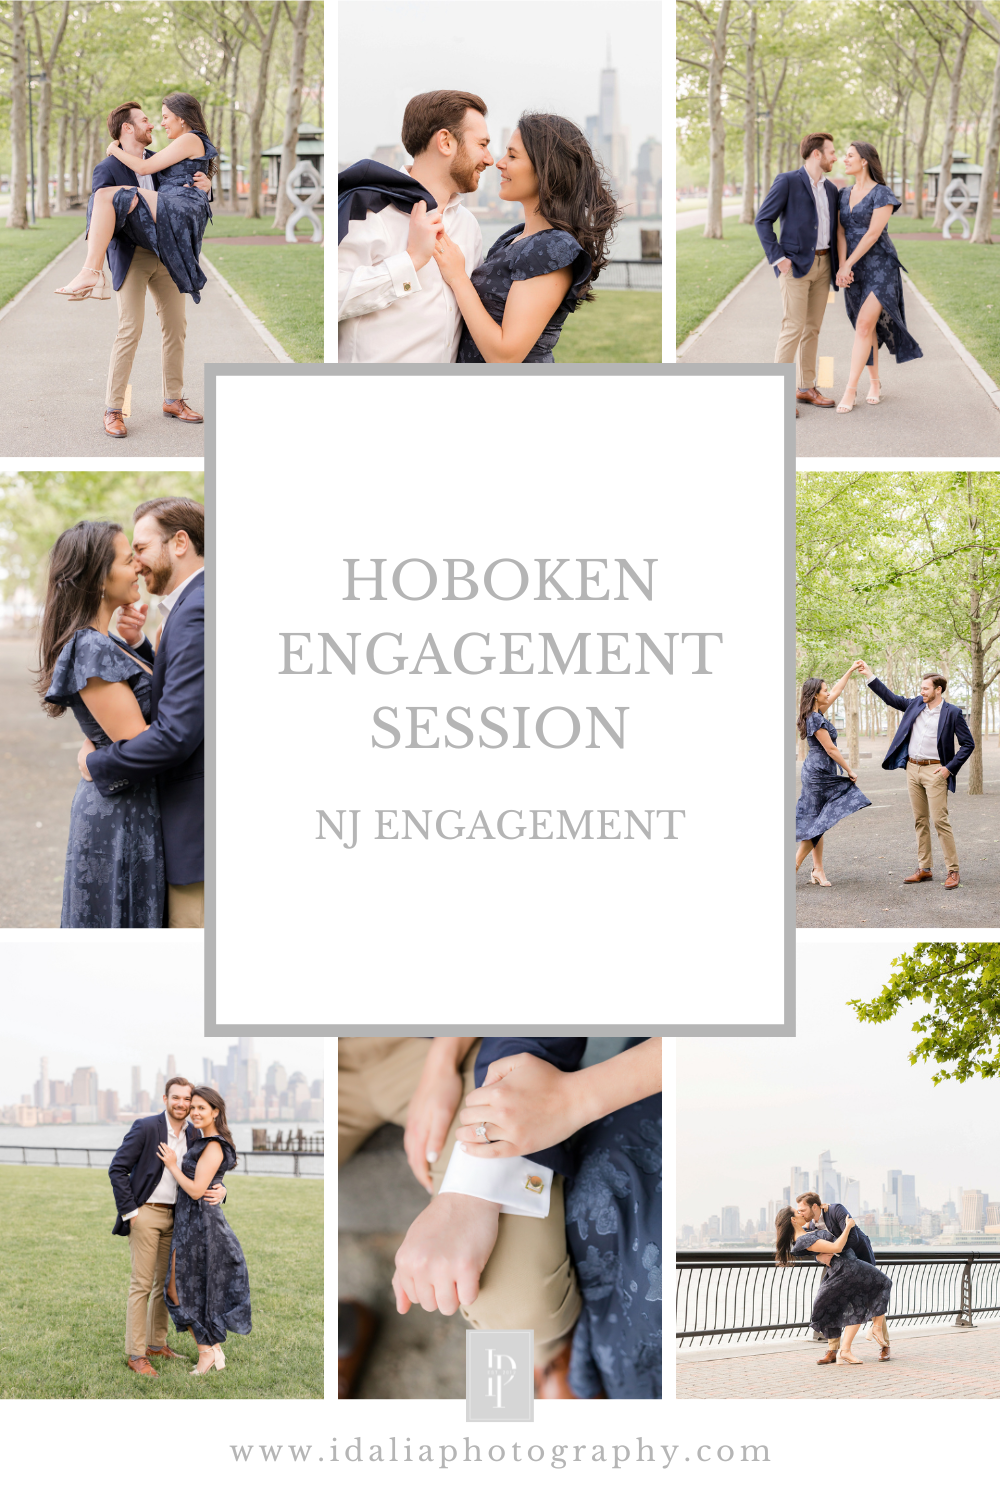 Springtime Hoboken engagement session at park with NYC skyline views photographed by NJ wedding photographer Idalia Photography